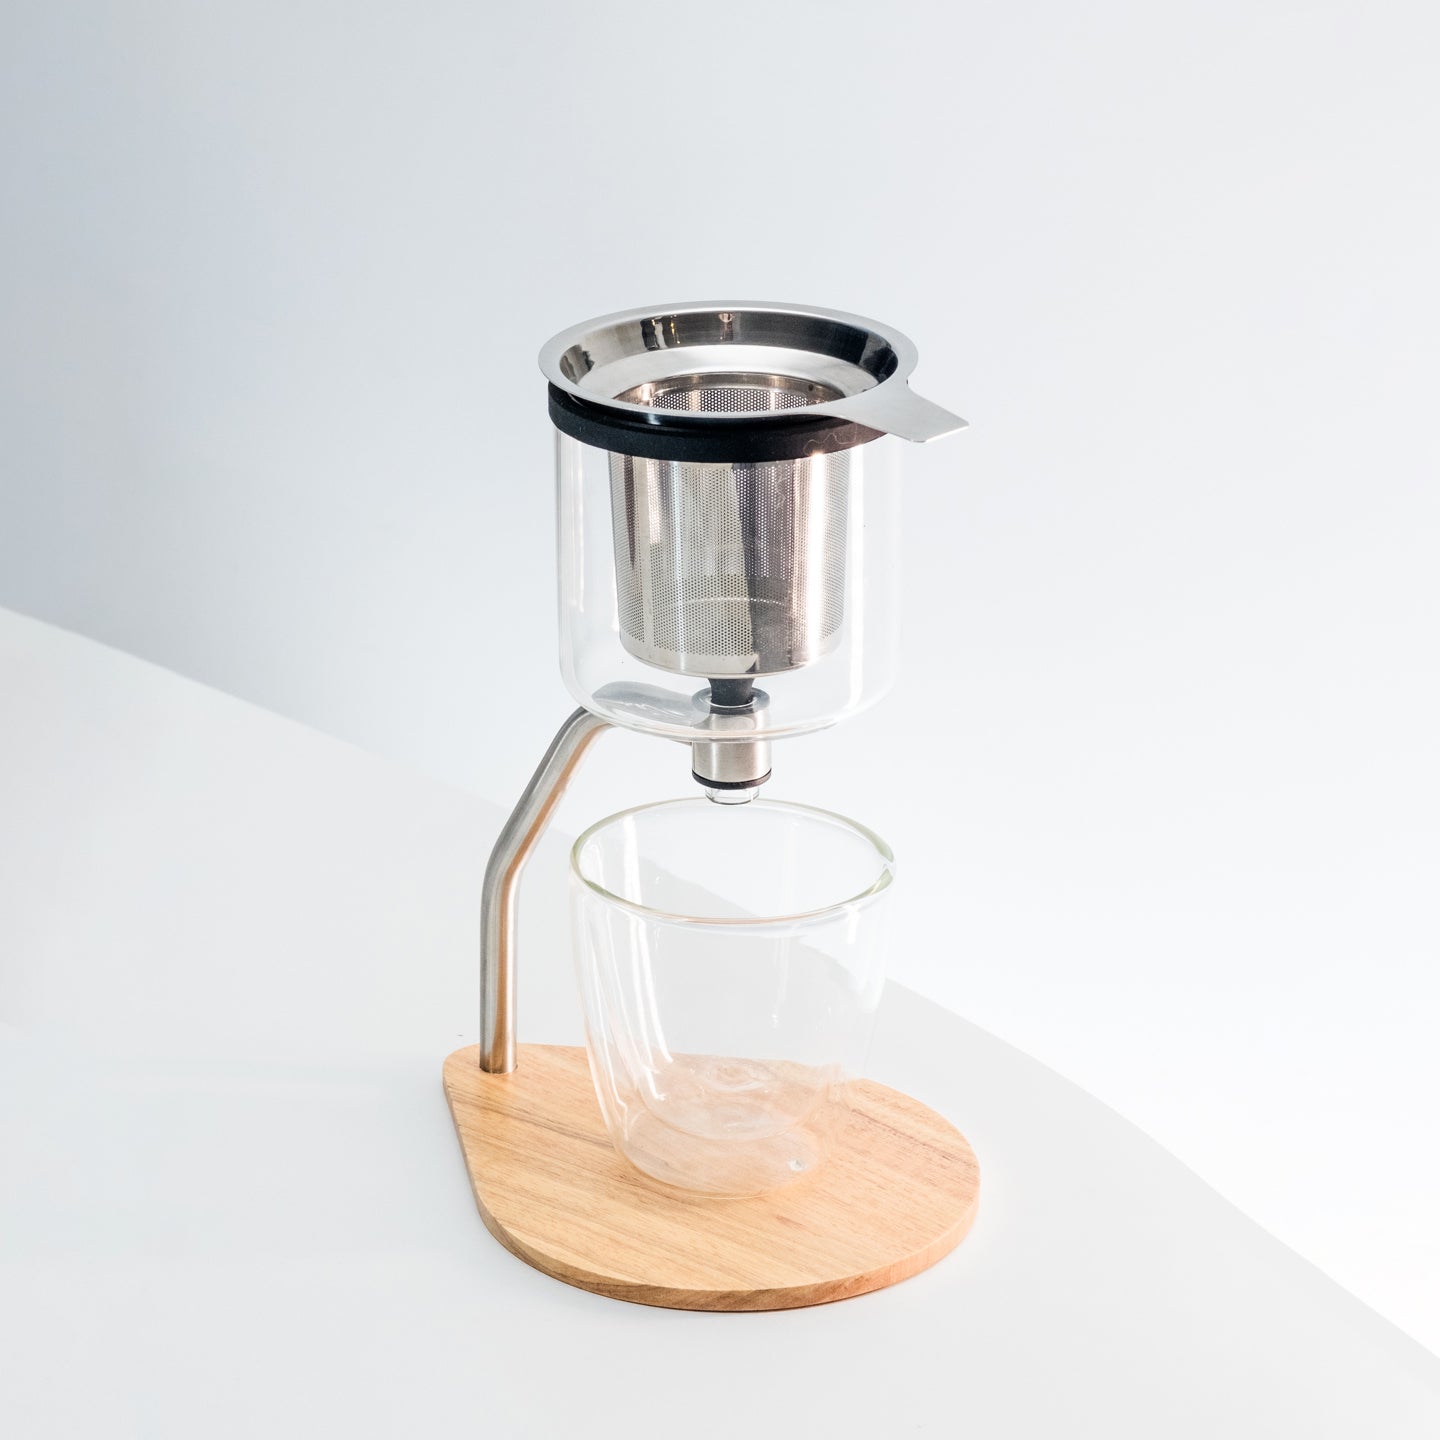 BrüMate Pour Over Coffee Brewing System – VisionCraft Awards